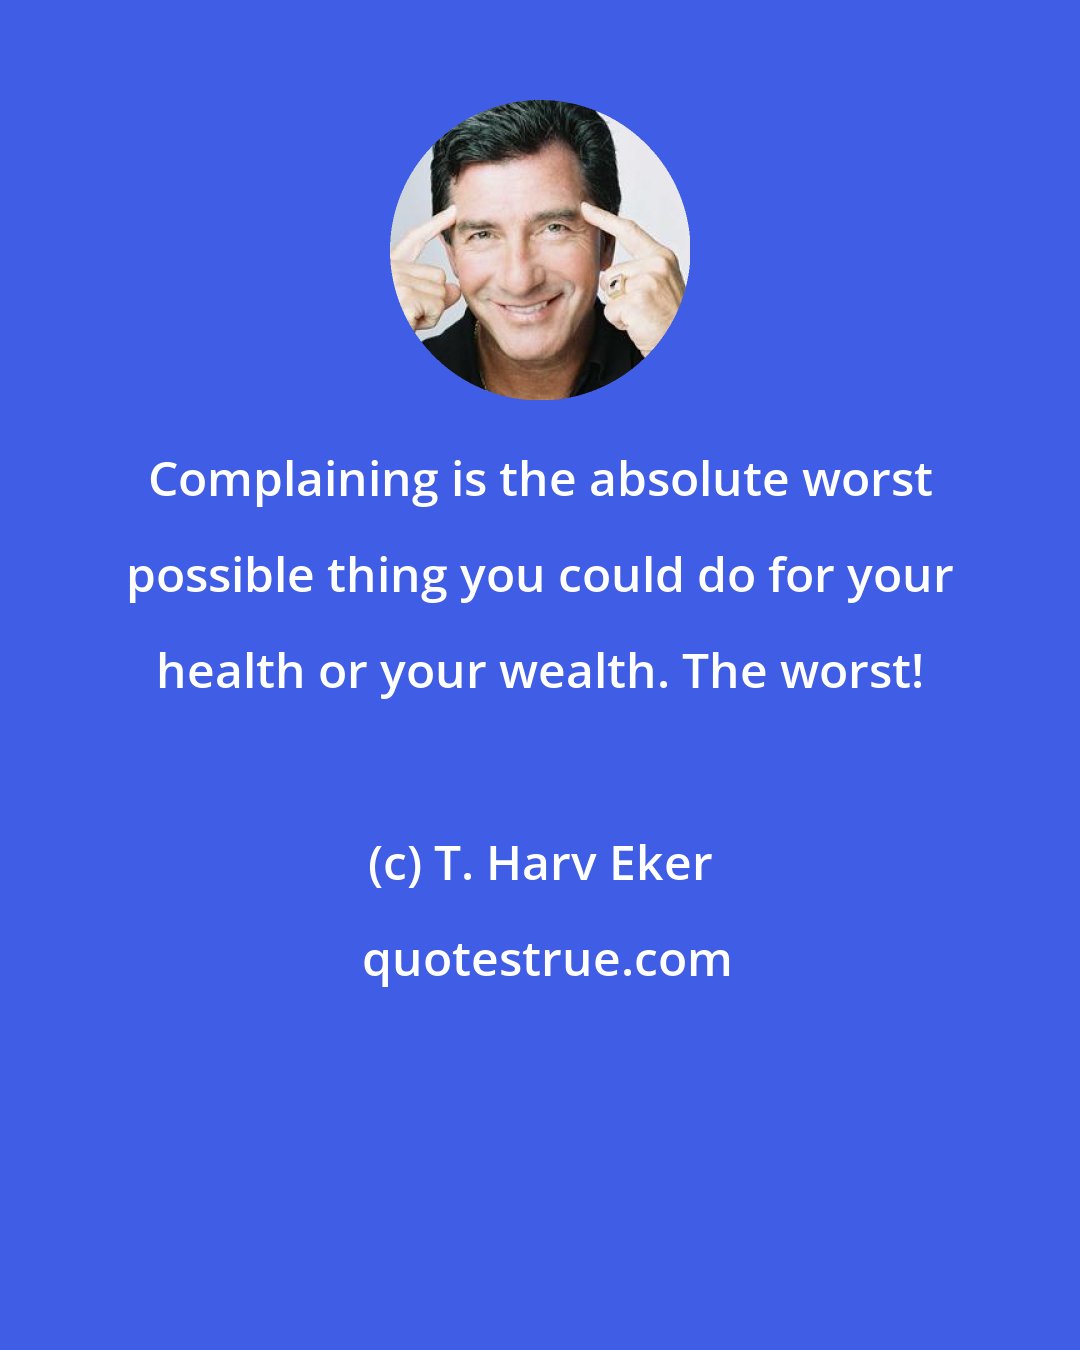 T. Harv Eker: Complaining is the absolute worst possible thing you could do for your health or your wealth. The worst!